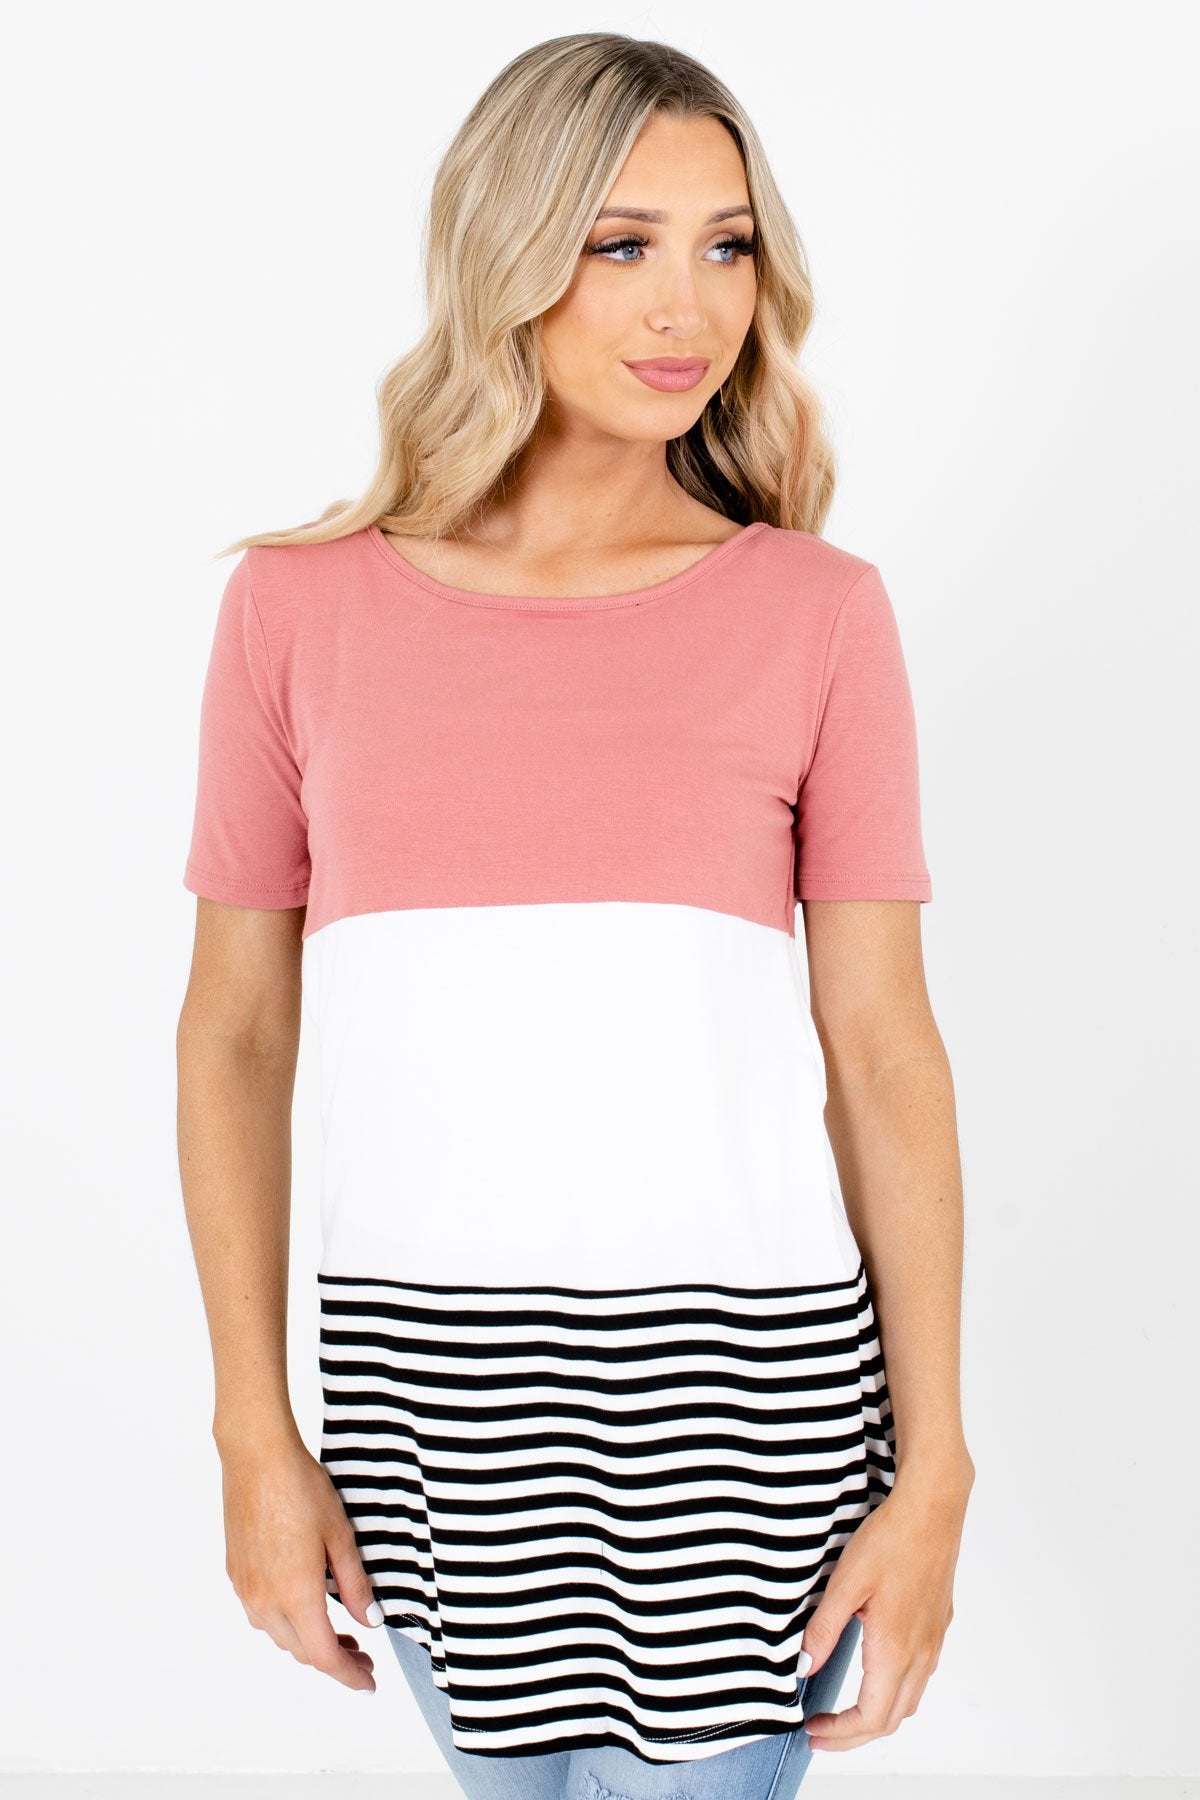 Women’s Pink Rounded Hem Boutique Tops